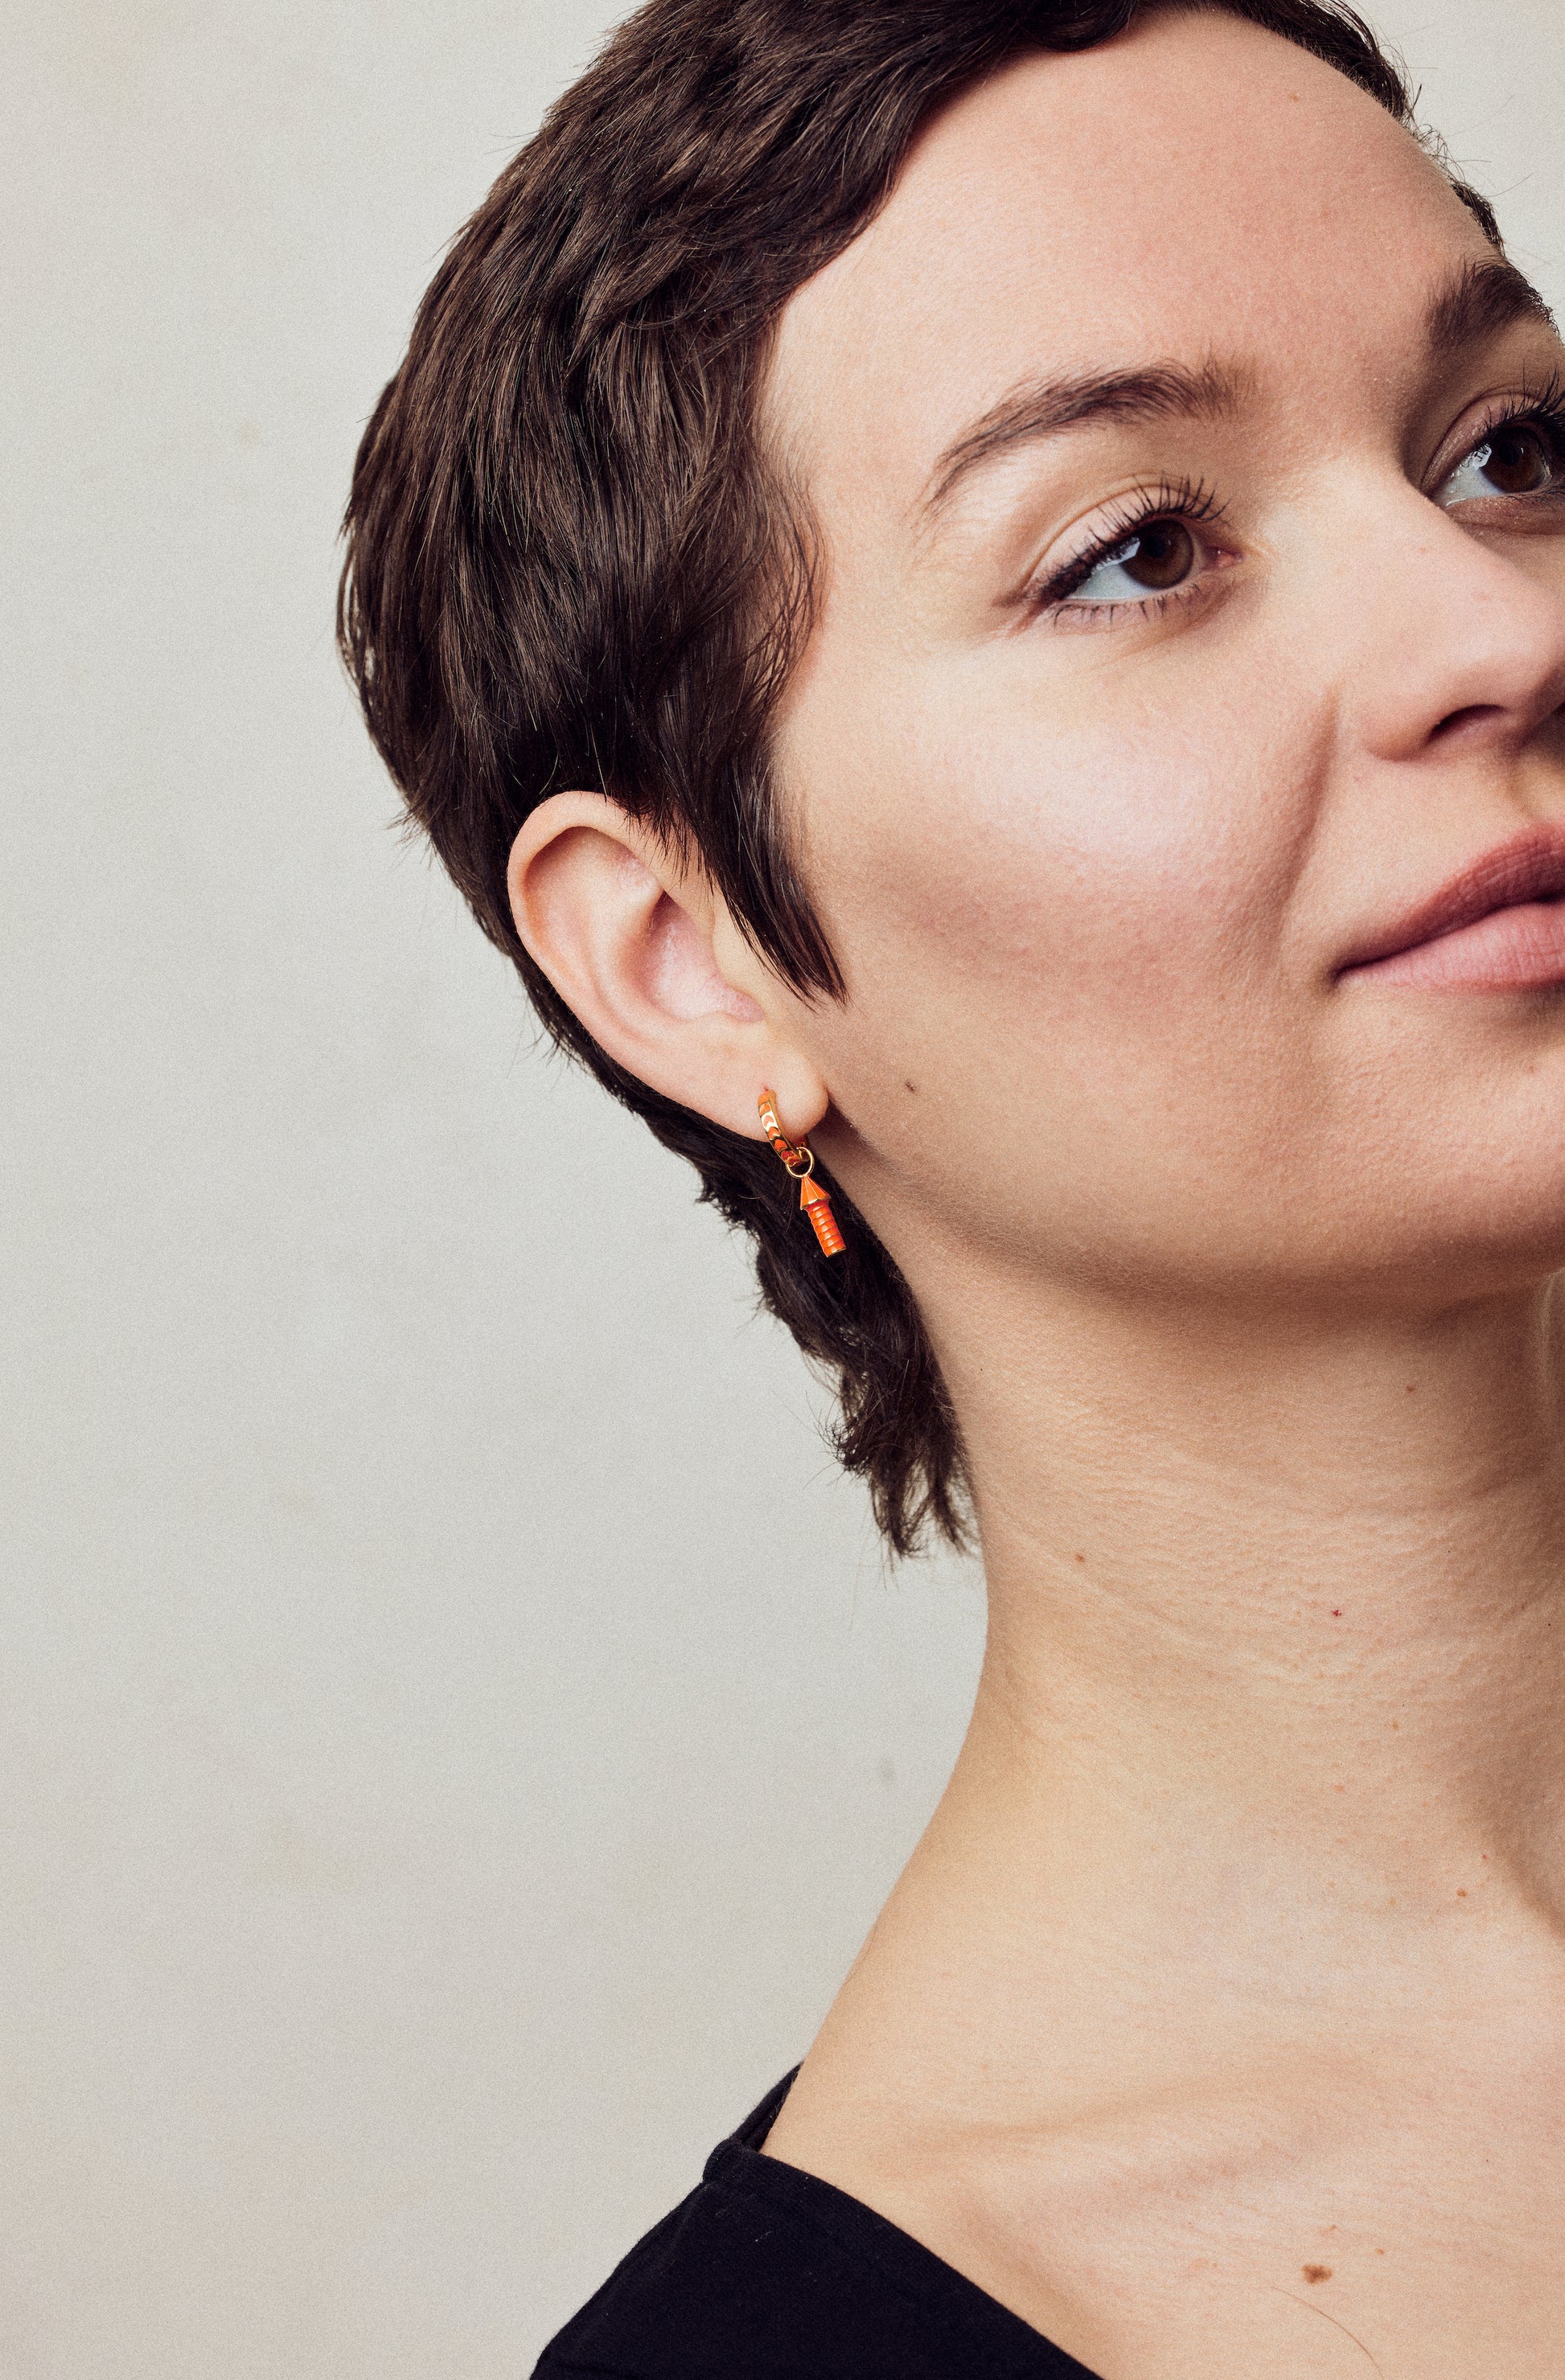 image of rocket enamel earrings in orange and gold shown on model with white skin and short brown hair